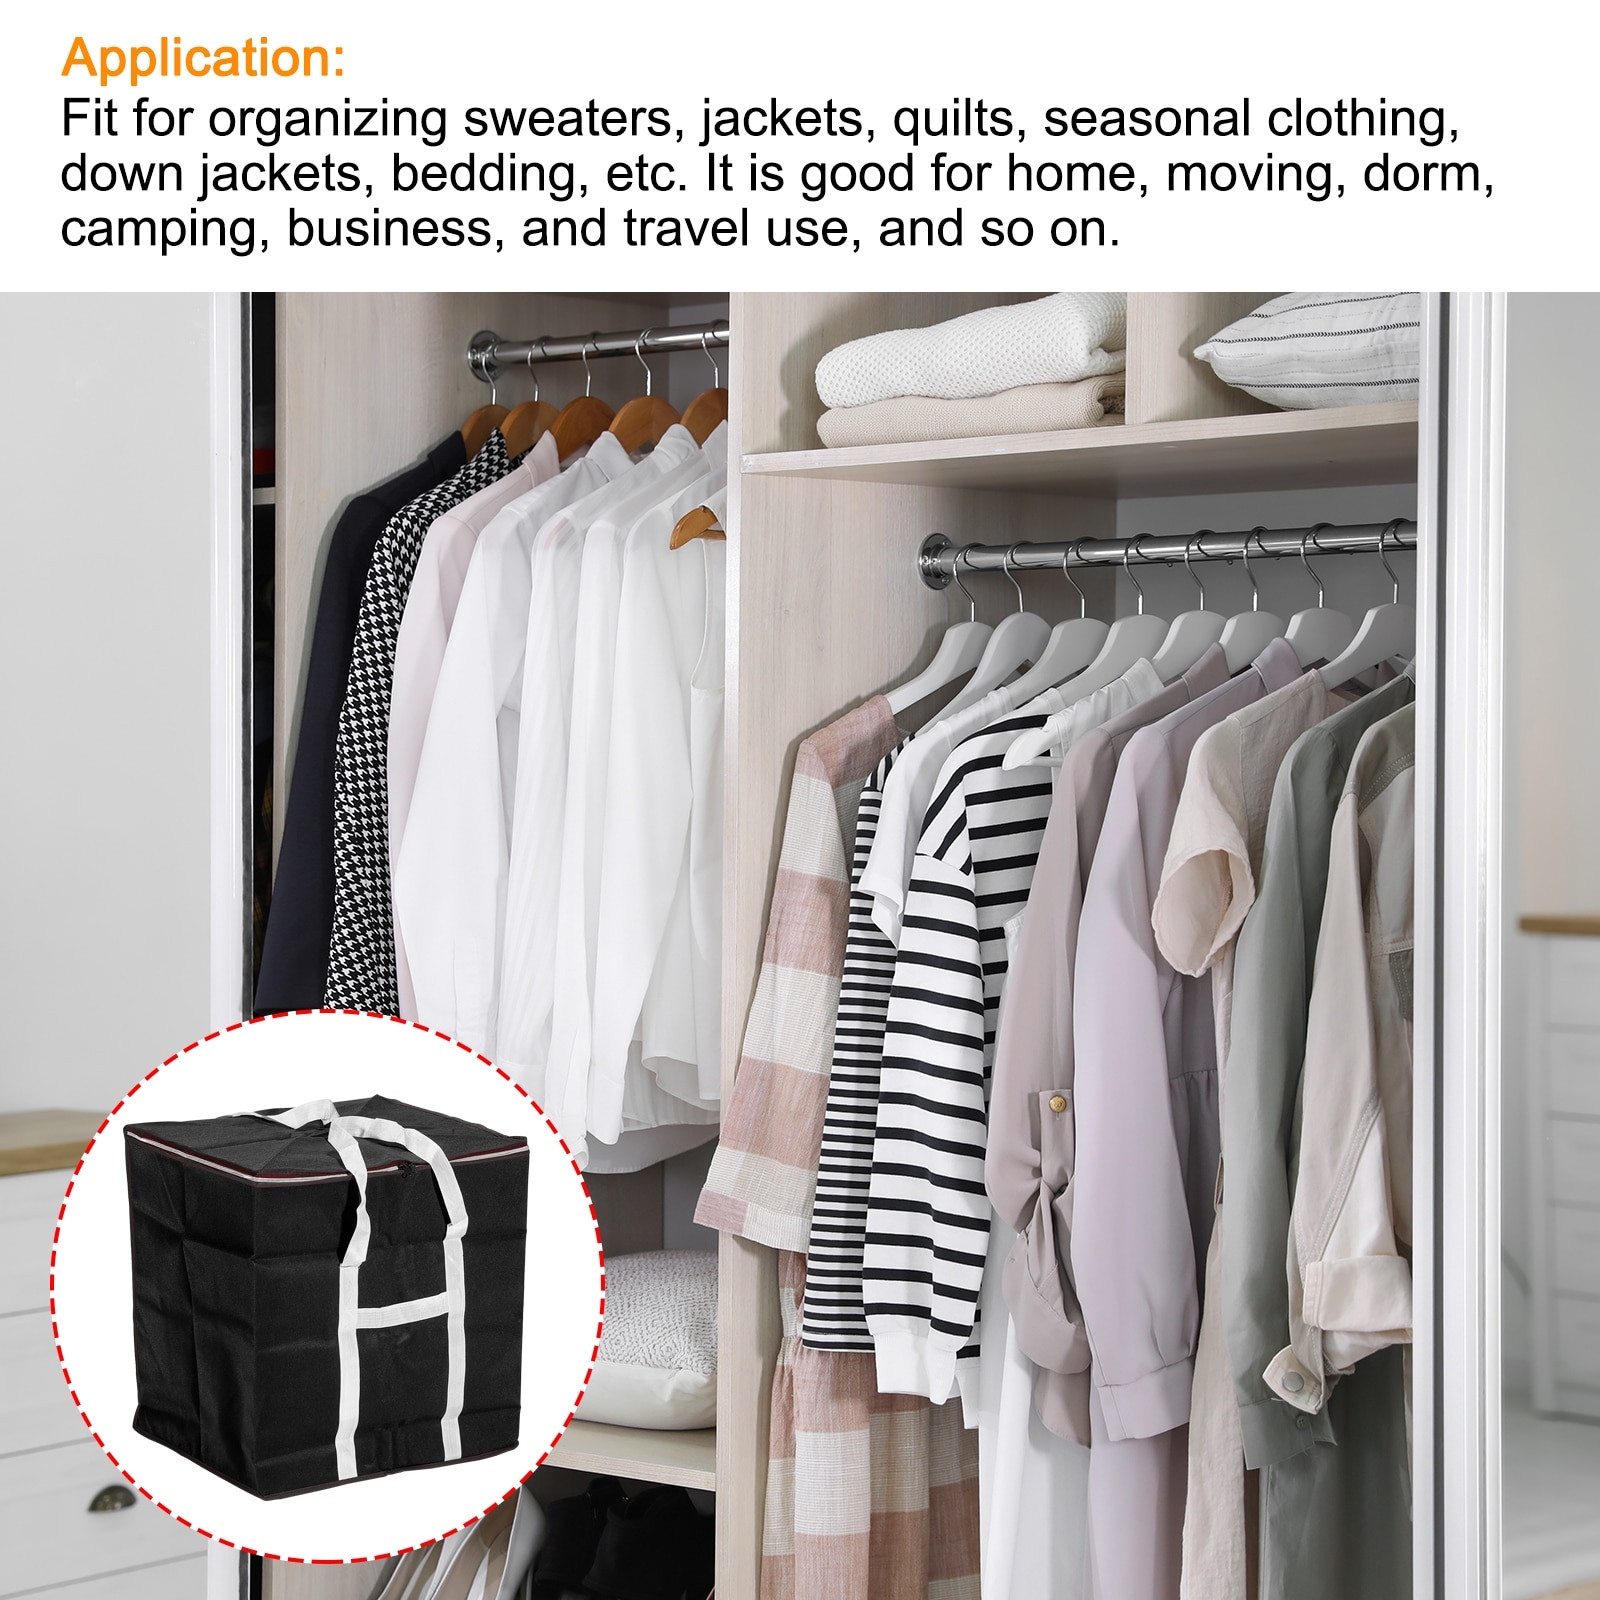 https://ak1.ostkcdn.com/images/products/is/images/direct/98bad616409c3e10132c2813472c8932f308f097/Storage-Tote-with-Zippers%2C-19.7%22-L-Heavy-Moving-Tote-Bags-for-Bedding.jpg